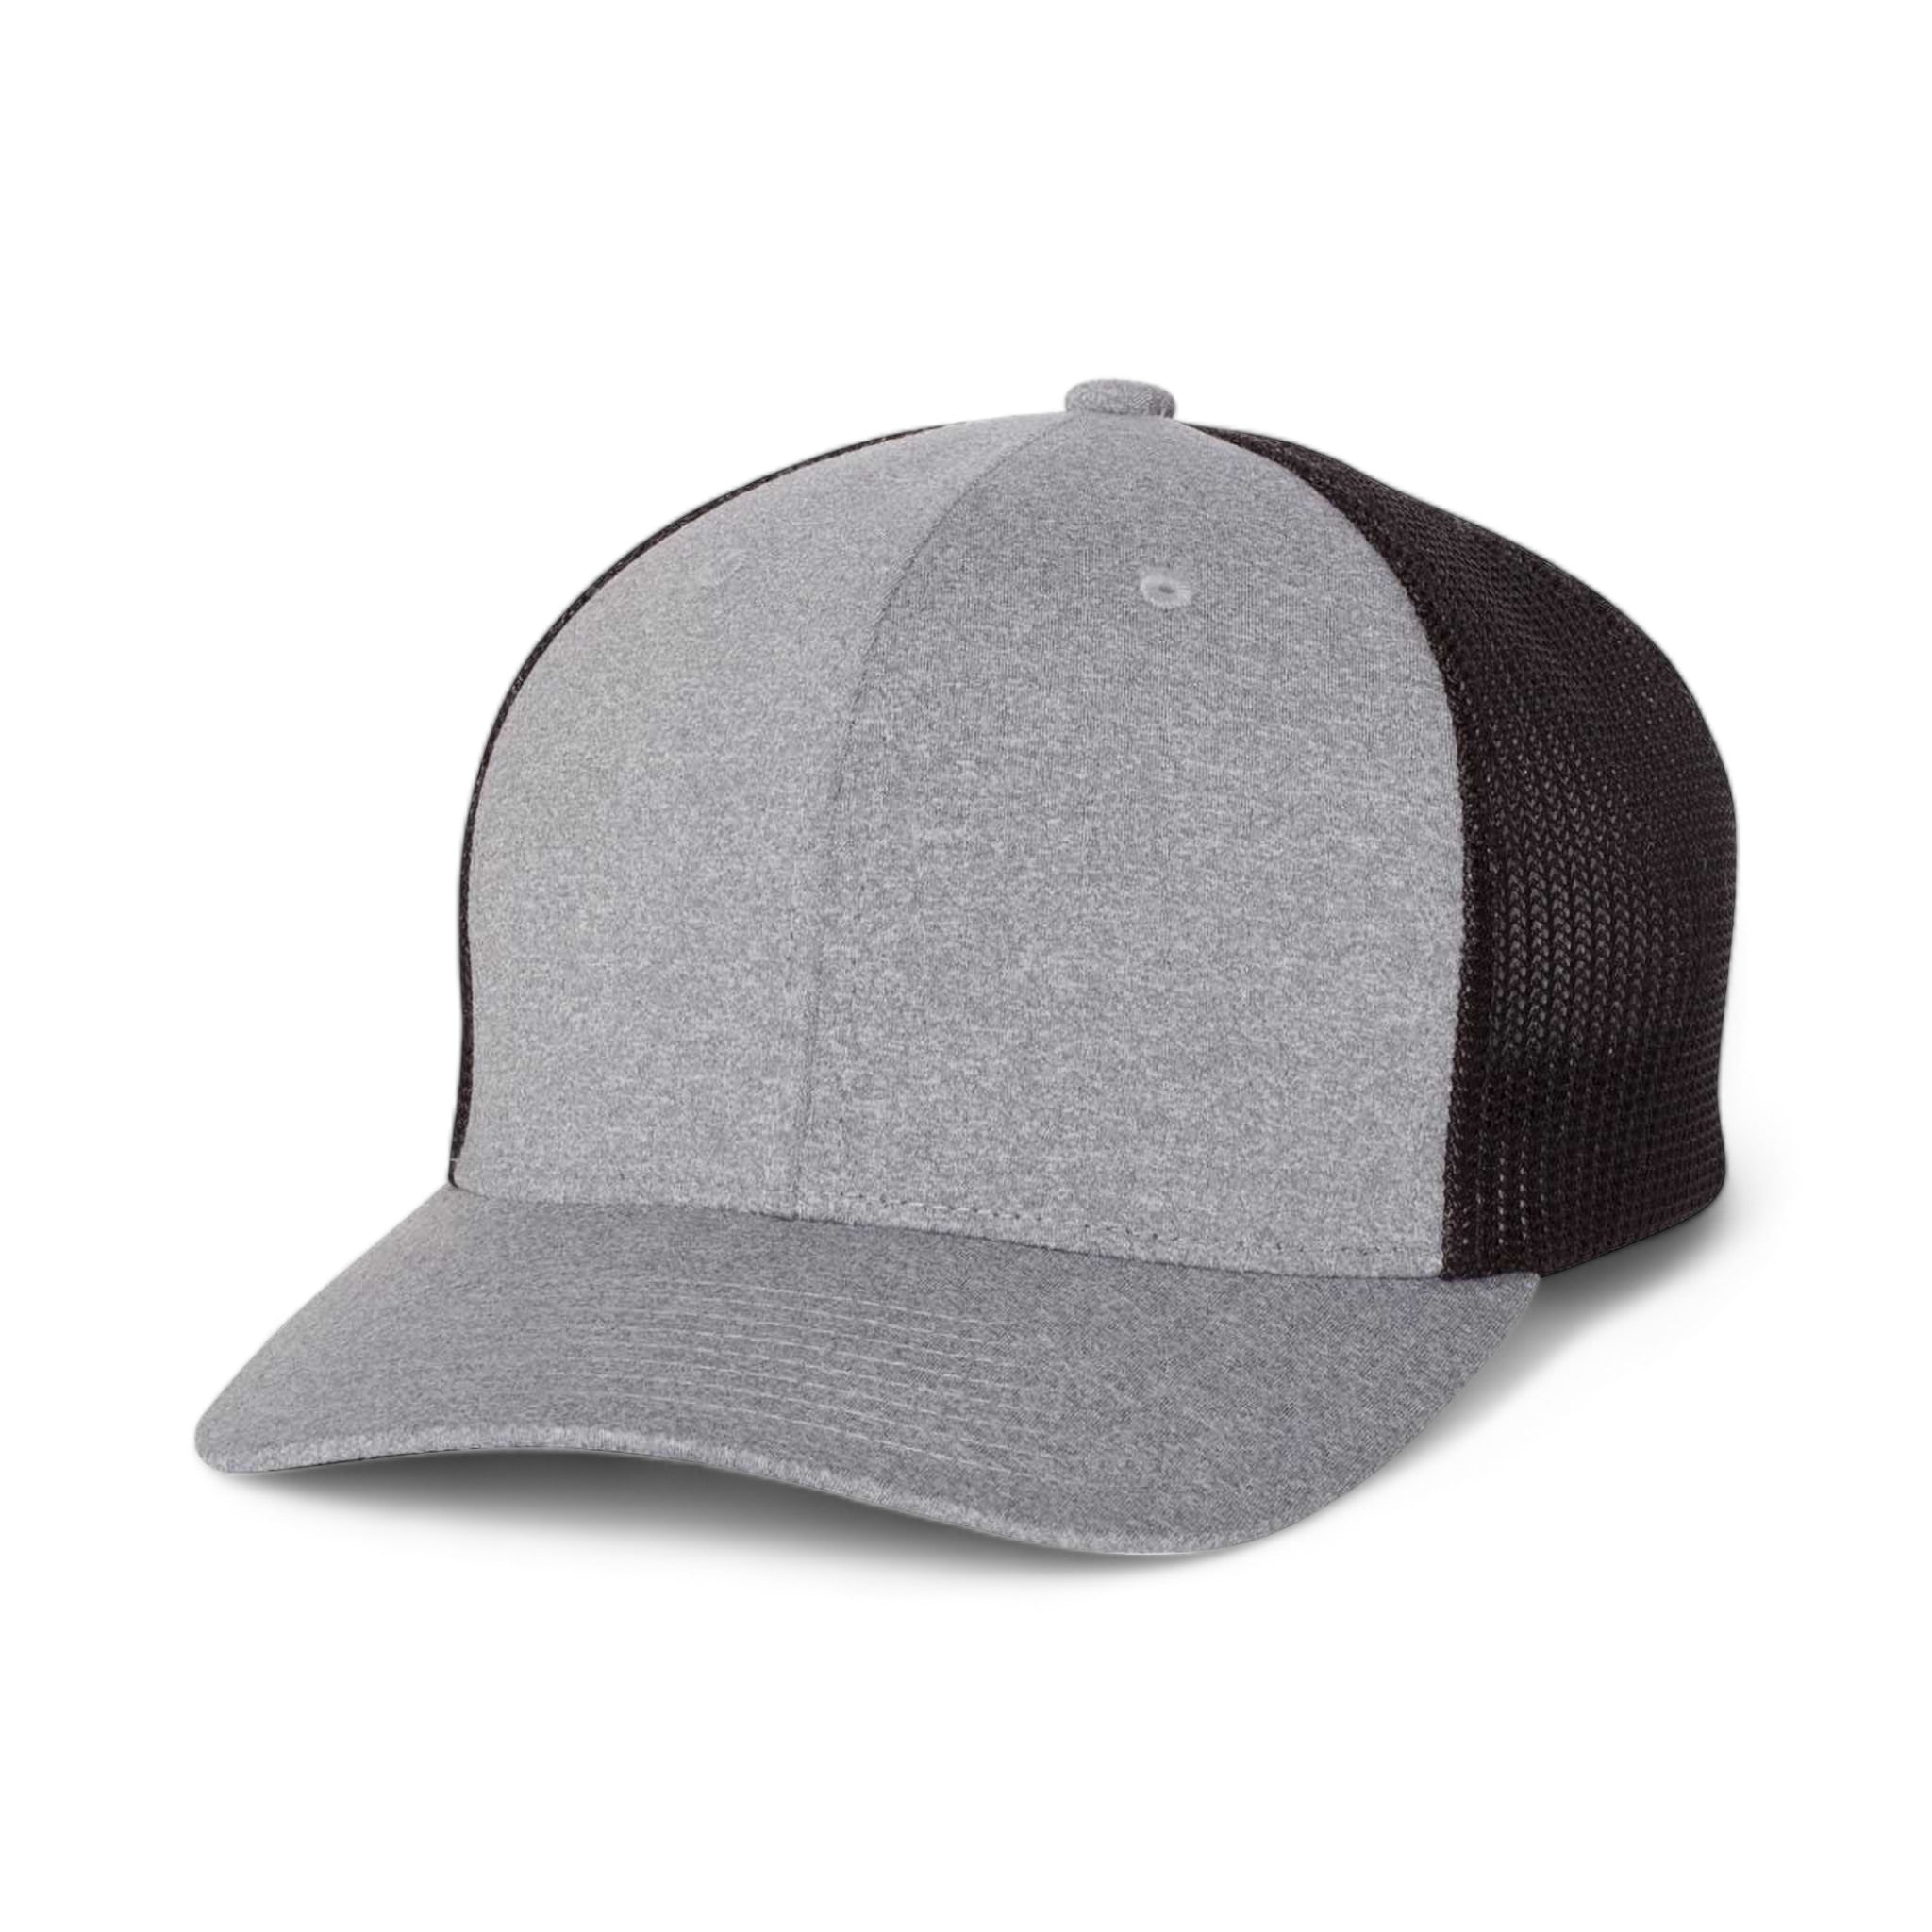 Side view of Flexfit 6311 custom hat in heather grey and black